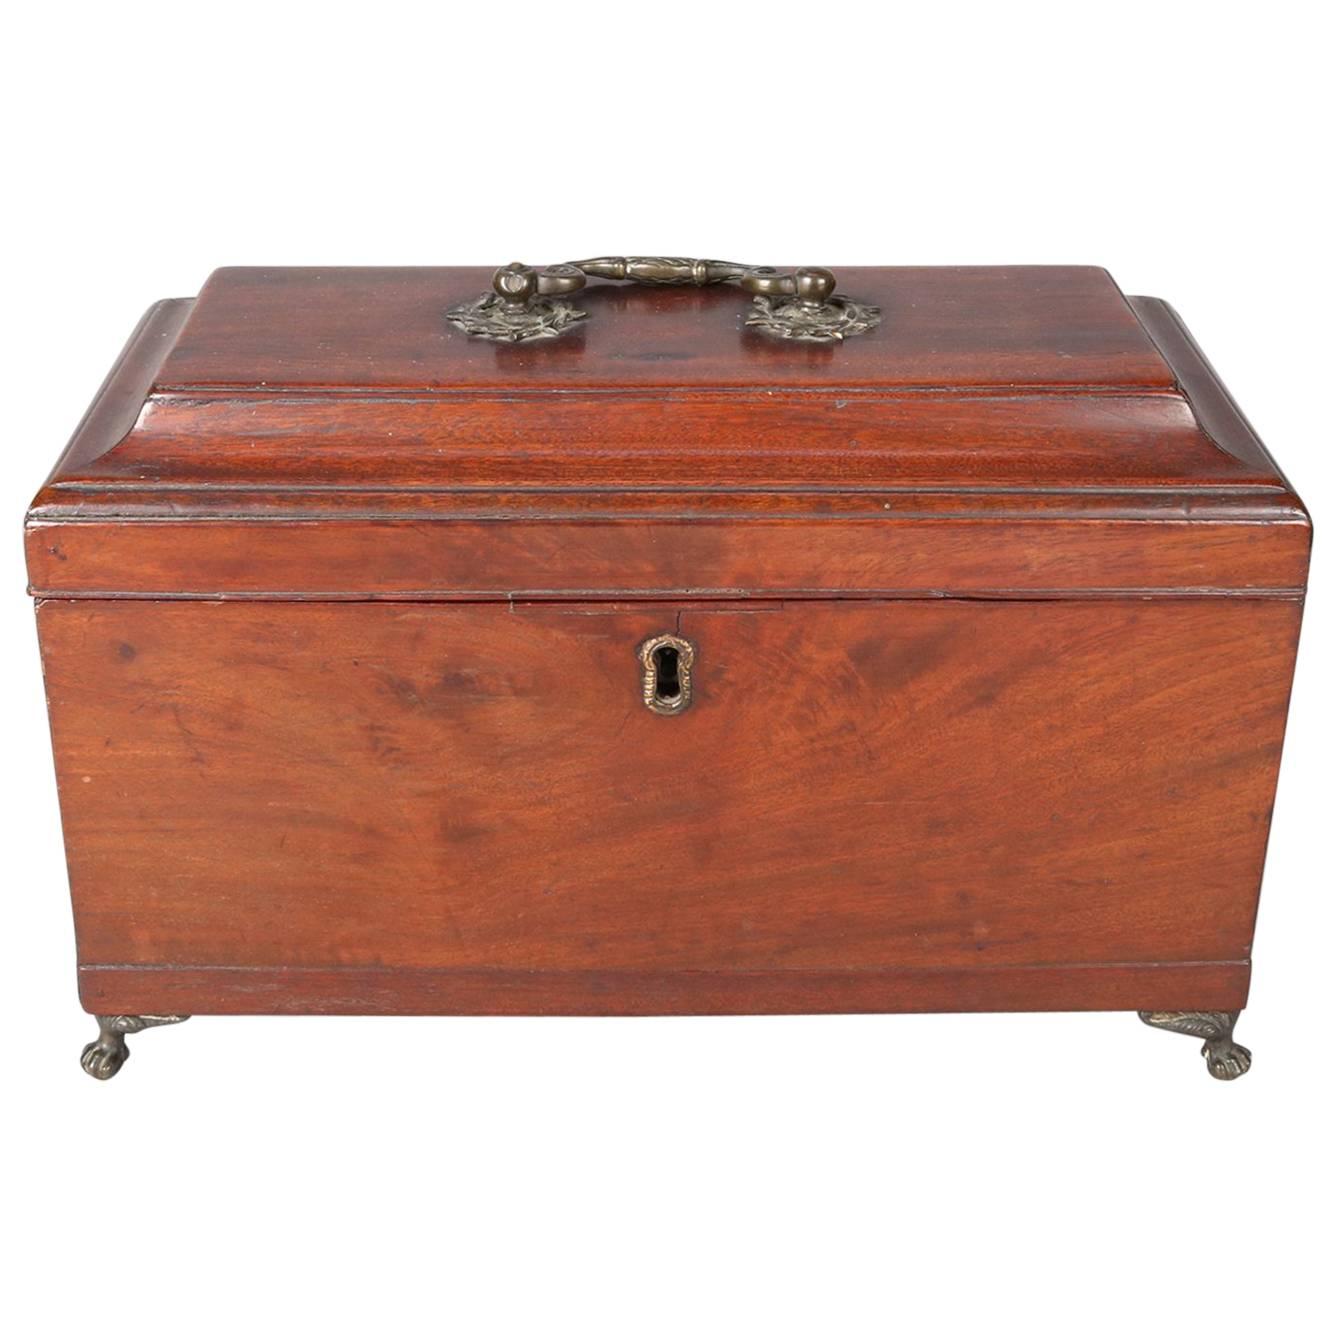 18th Century Antique English Regency Mahogany Claw and Ball Footed Tea Caddy